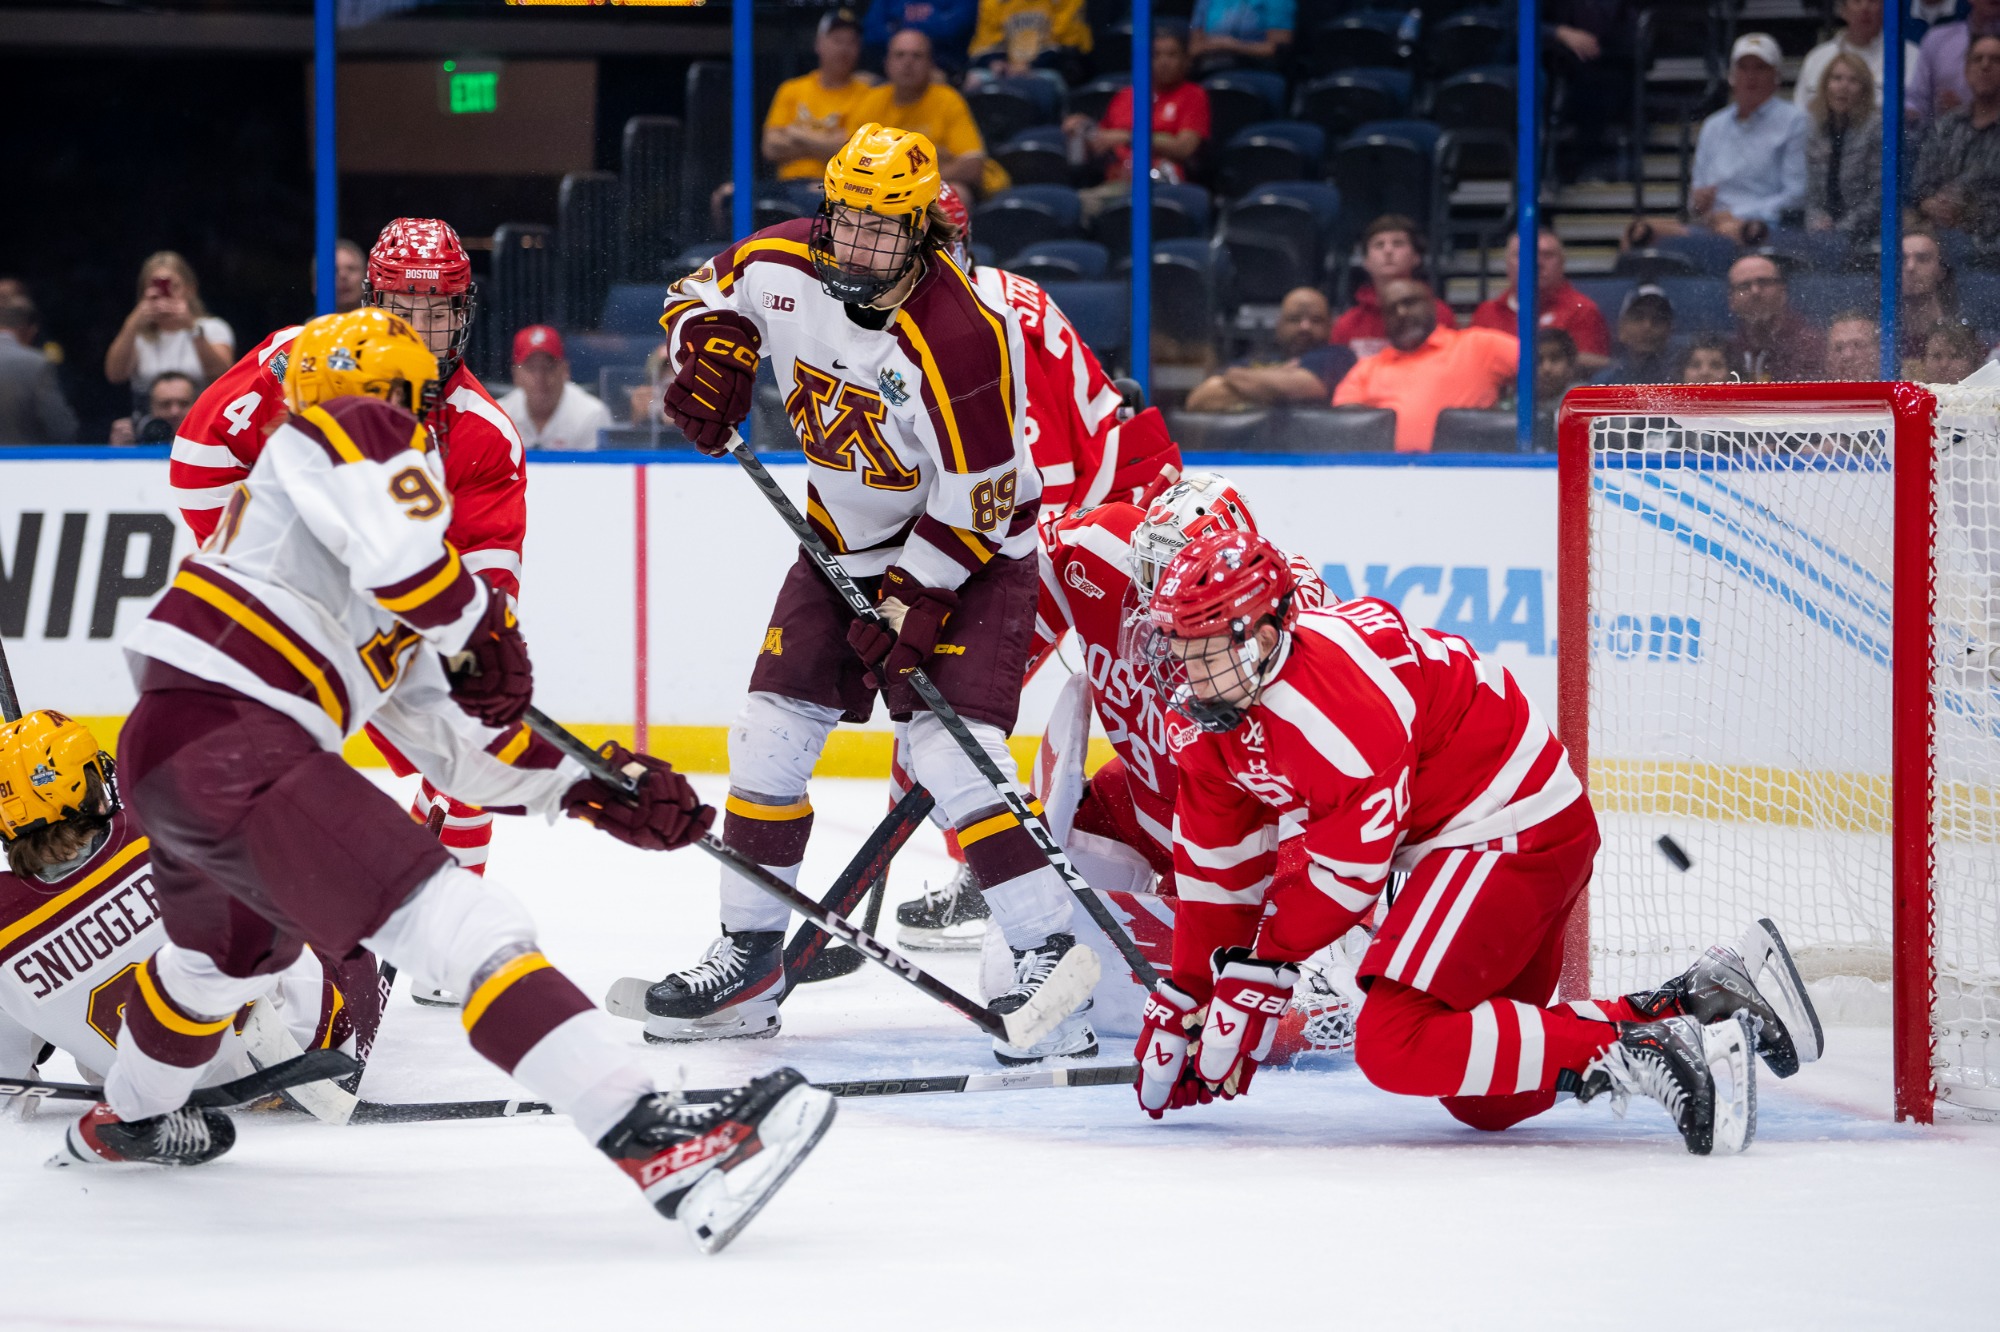 Gopher hockey star changes mind, signs with NHL